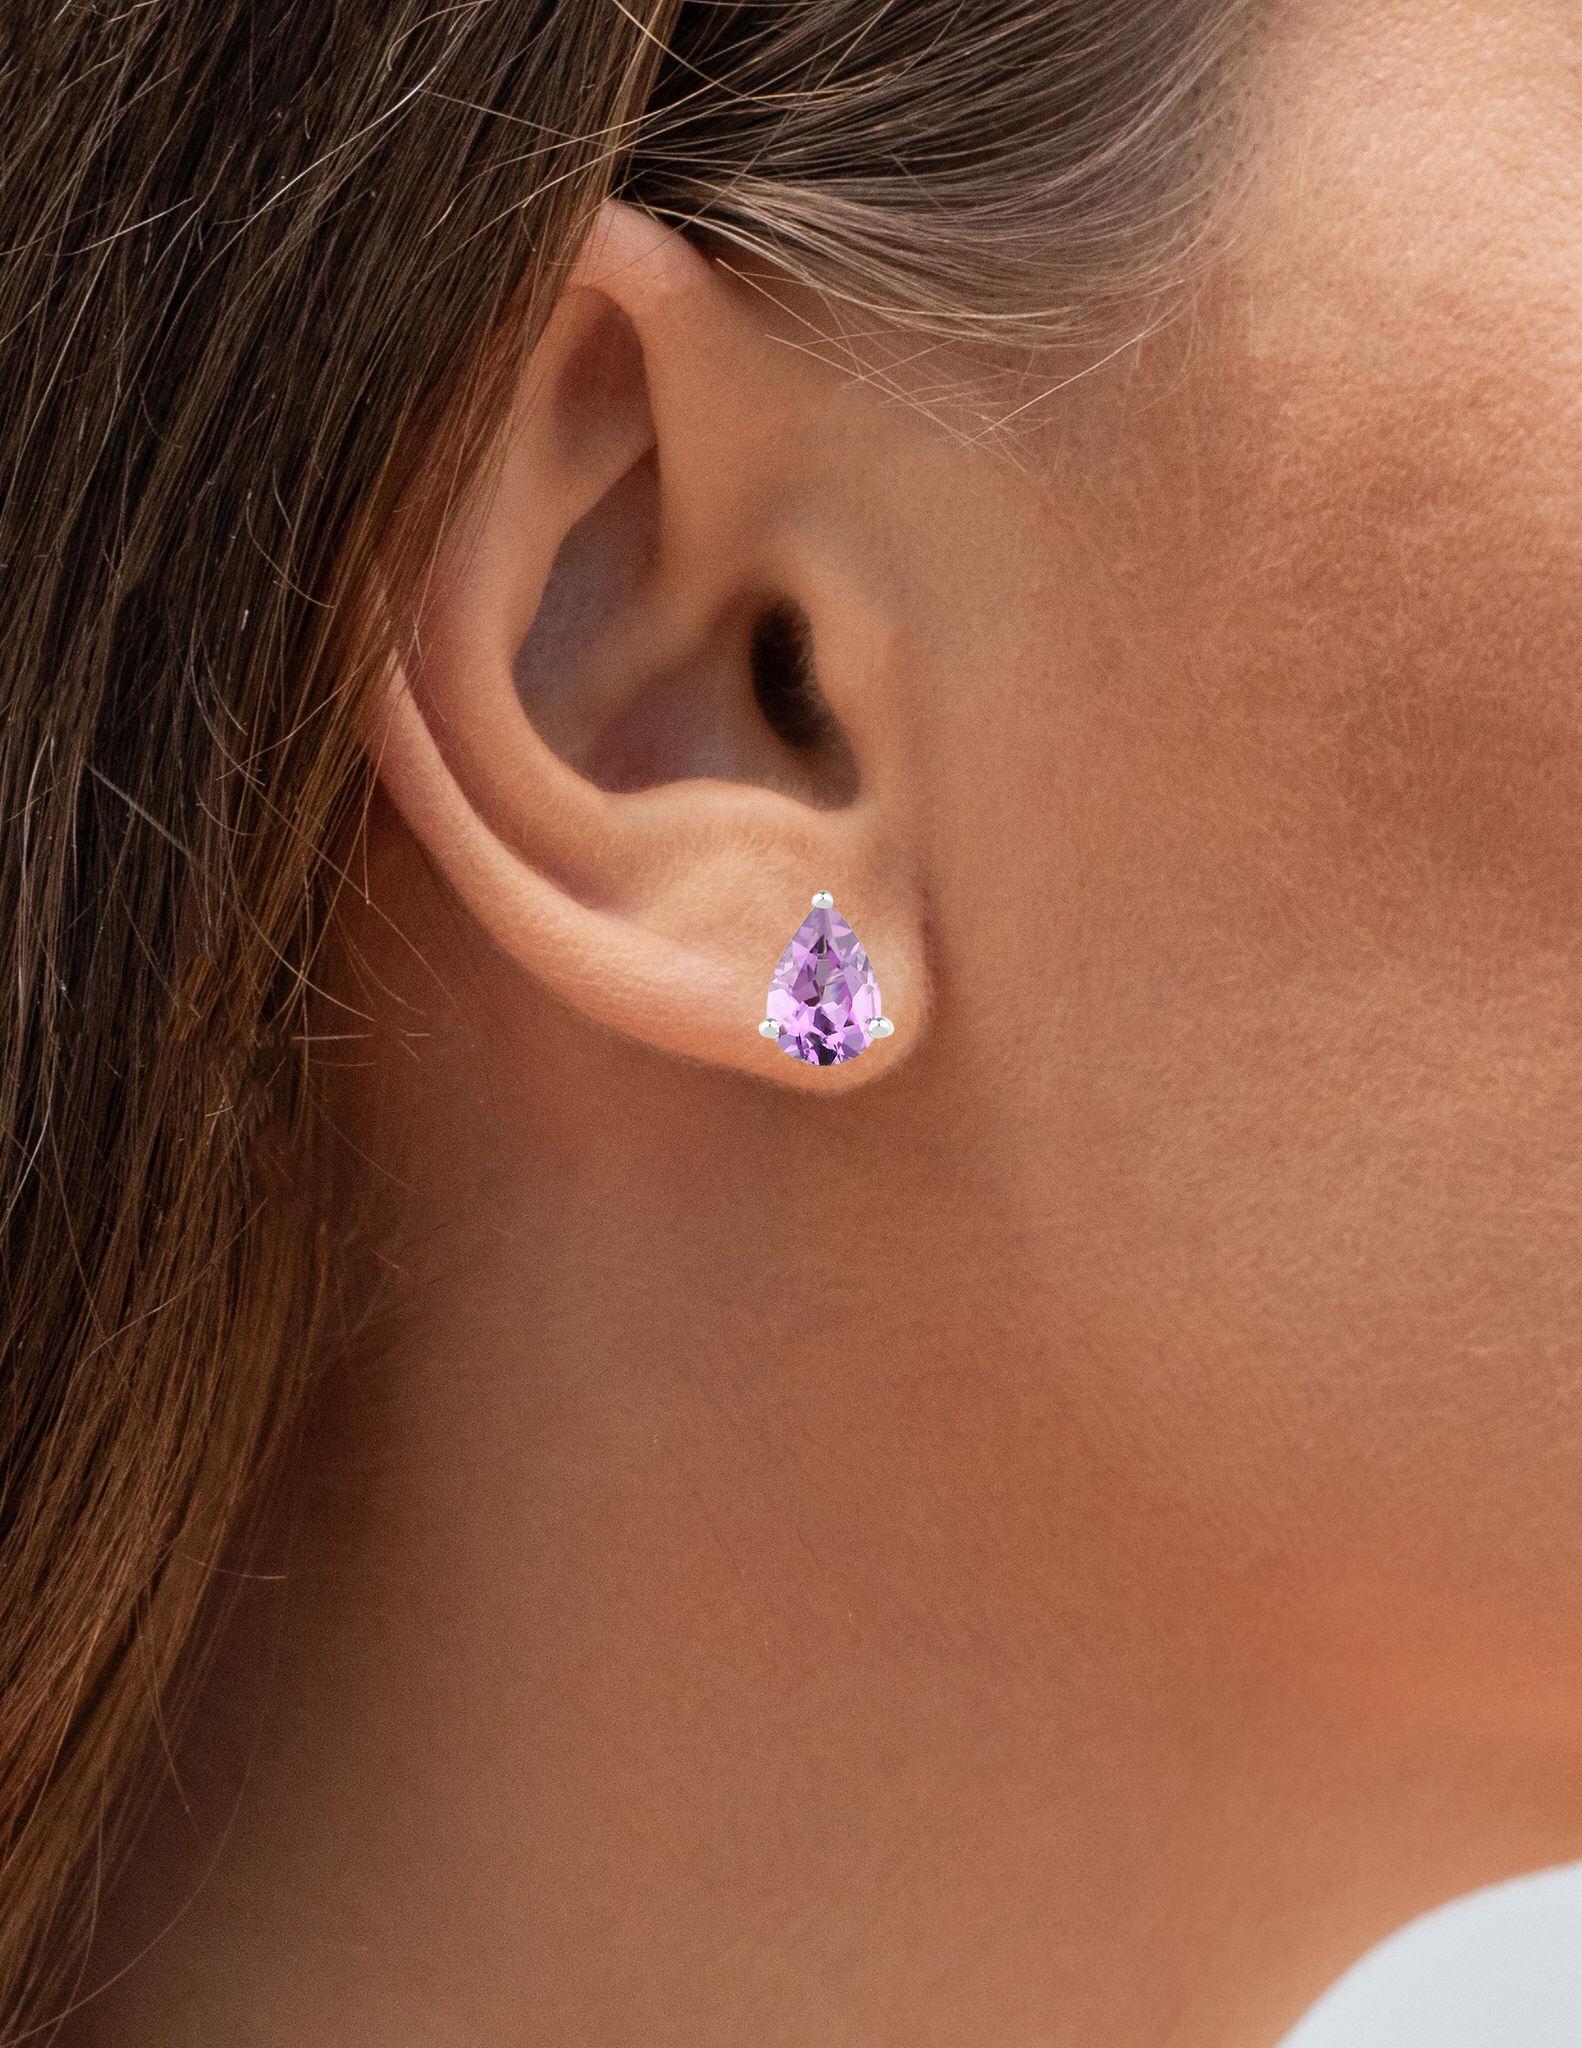 Contemporary Pear Cut Amethyst Stud Earrings 1.25 Carats Rhodium Plated Sterling Silver For Sale